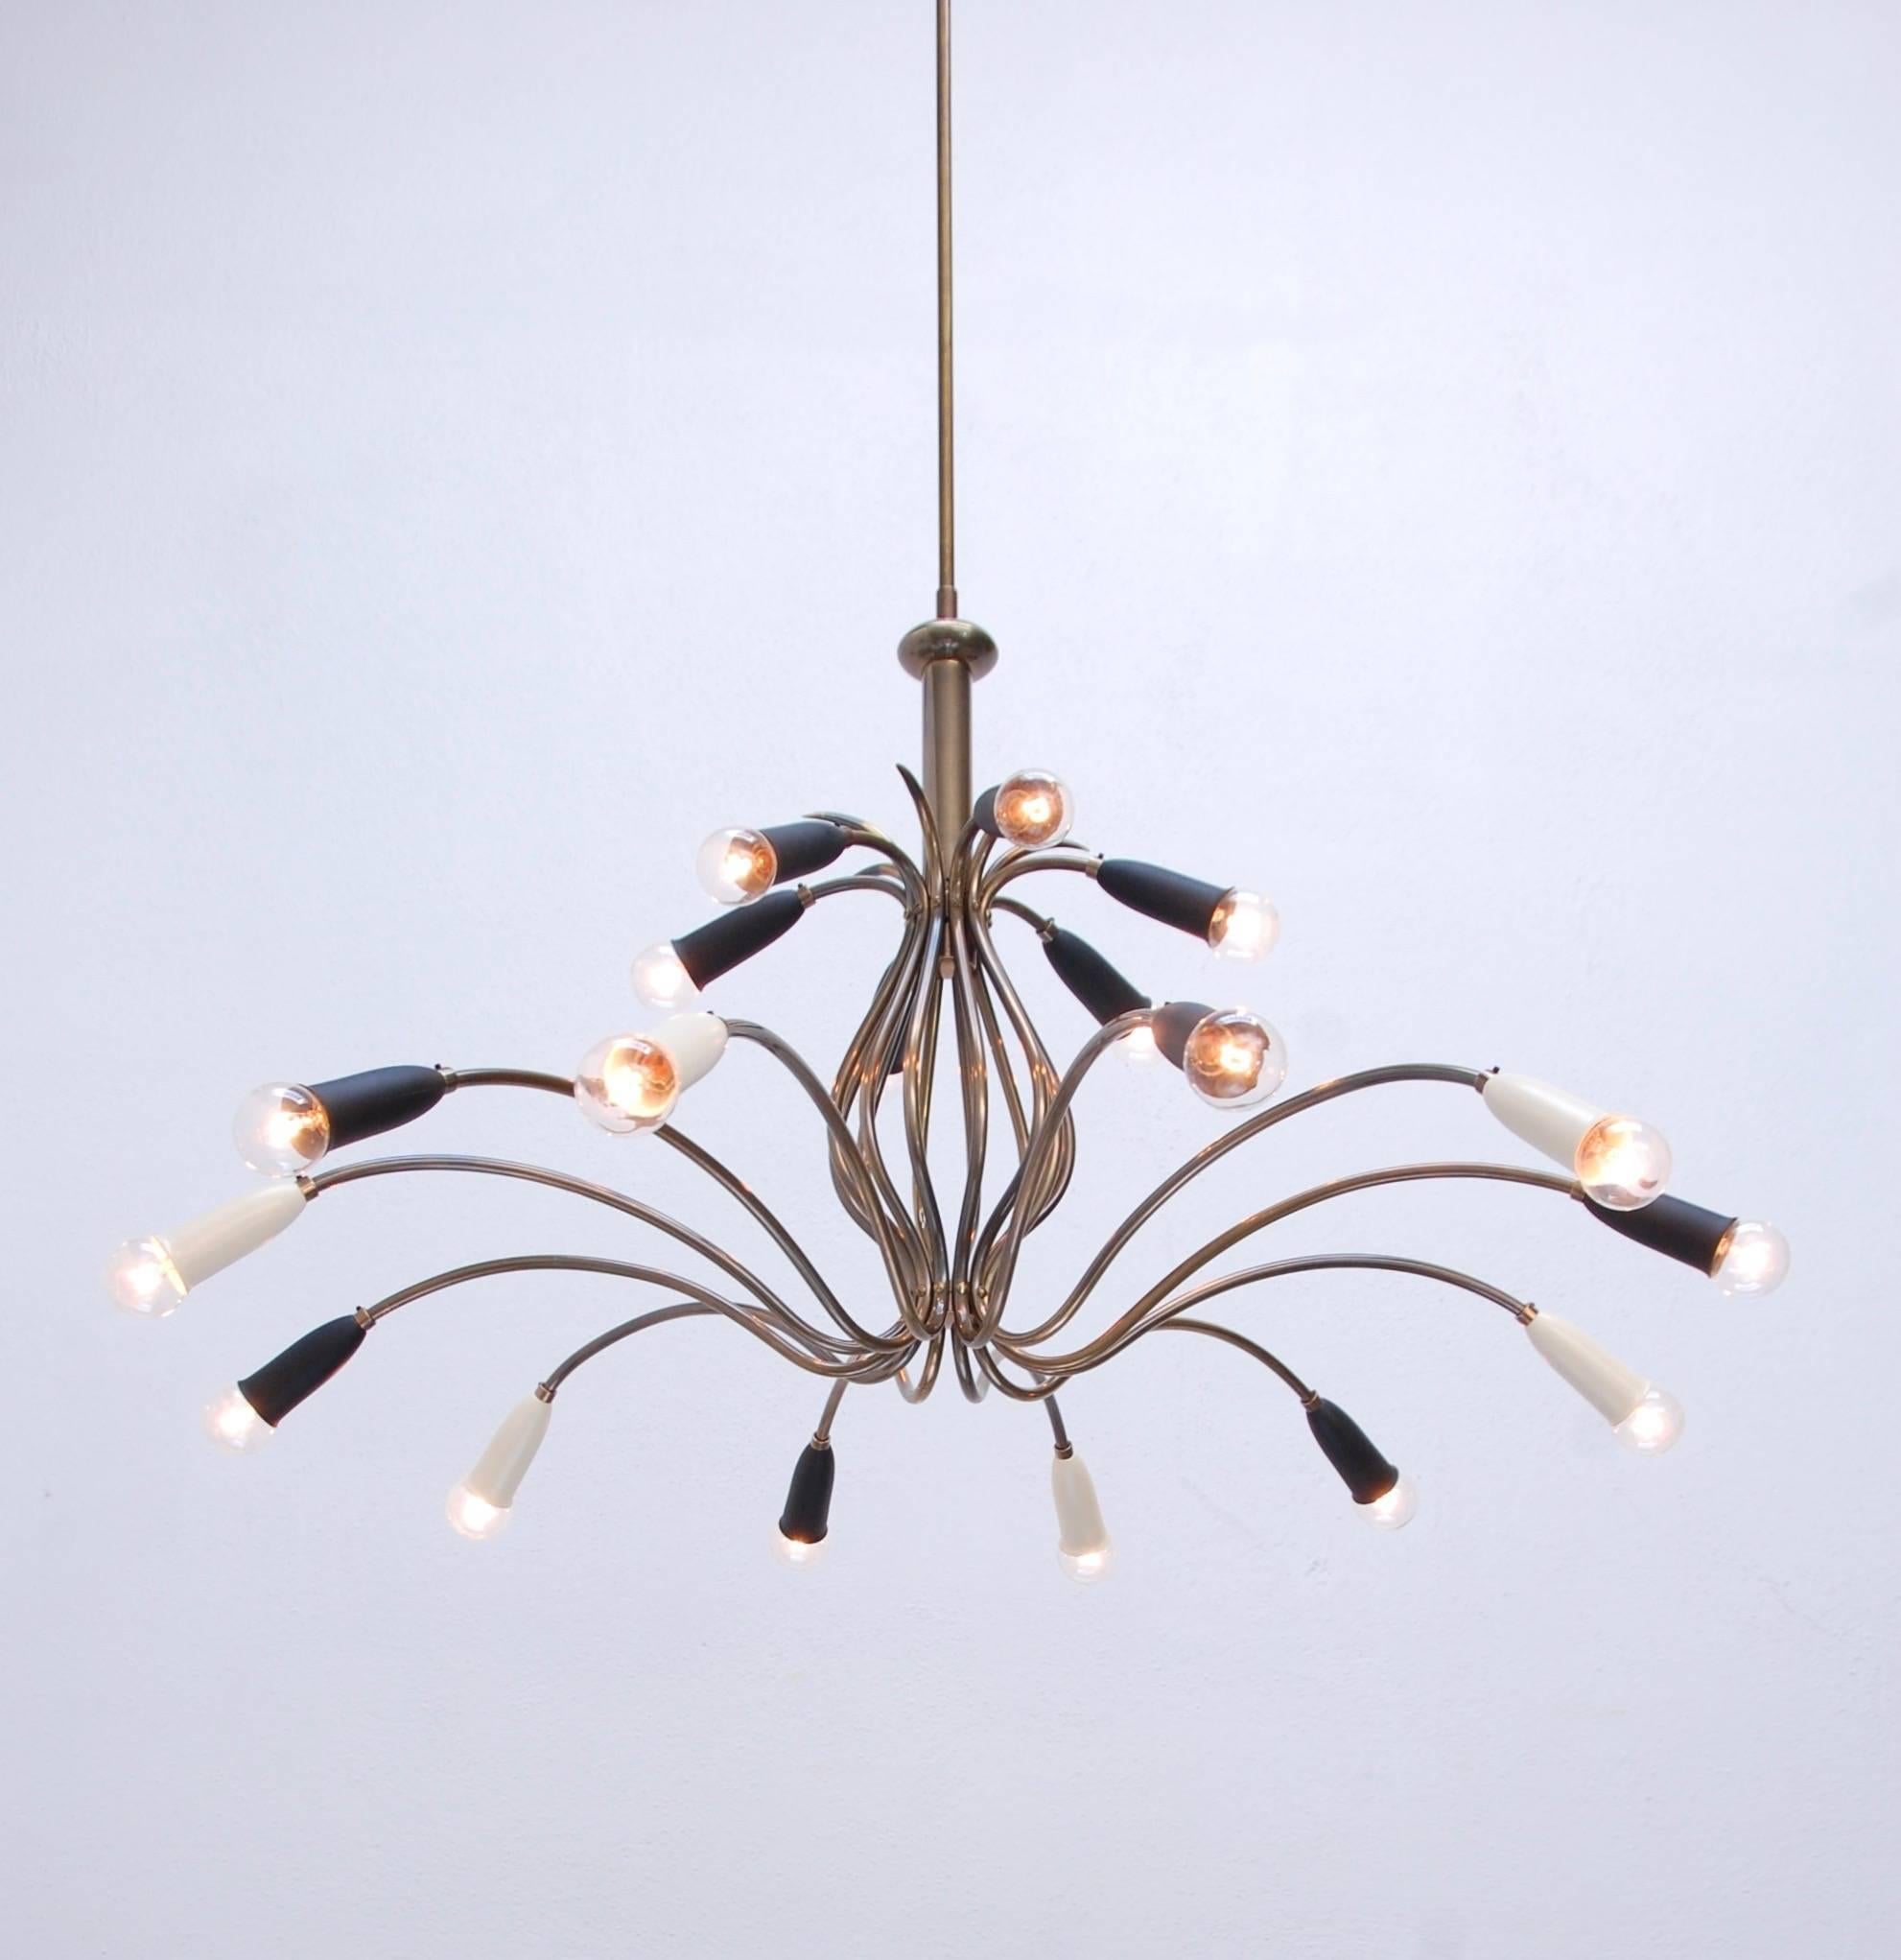 Of the period Italian 18-light botanical chandelier from the 1950s. Fully restored with E12 candelabra based sockets, wired for the US. Overall drop adjustable upon request. Patinated lacquered brass and painted aluminium.
Measures: Overall drop: